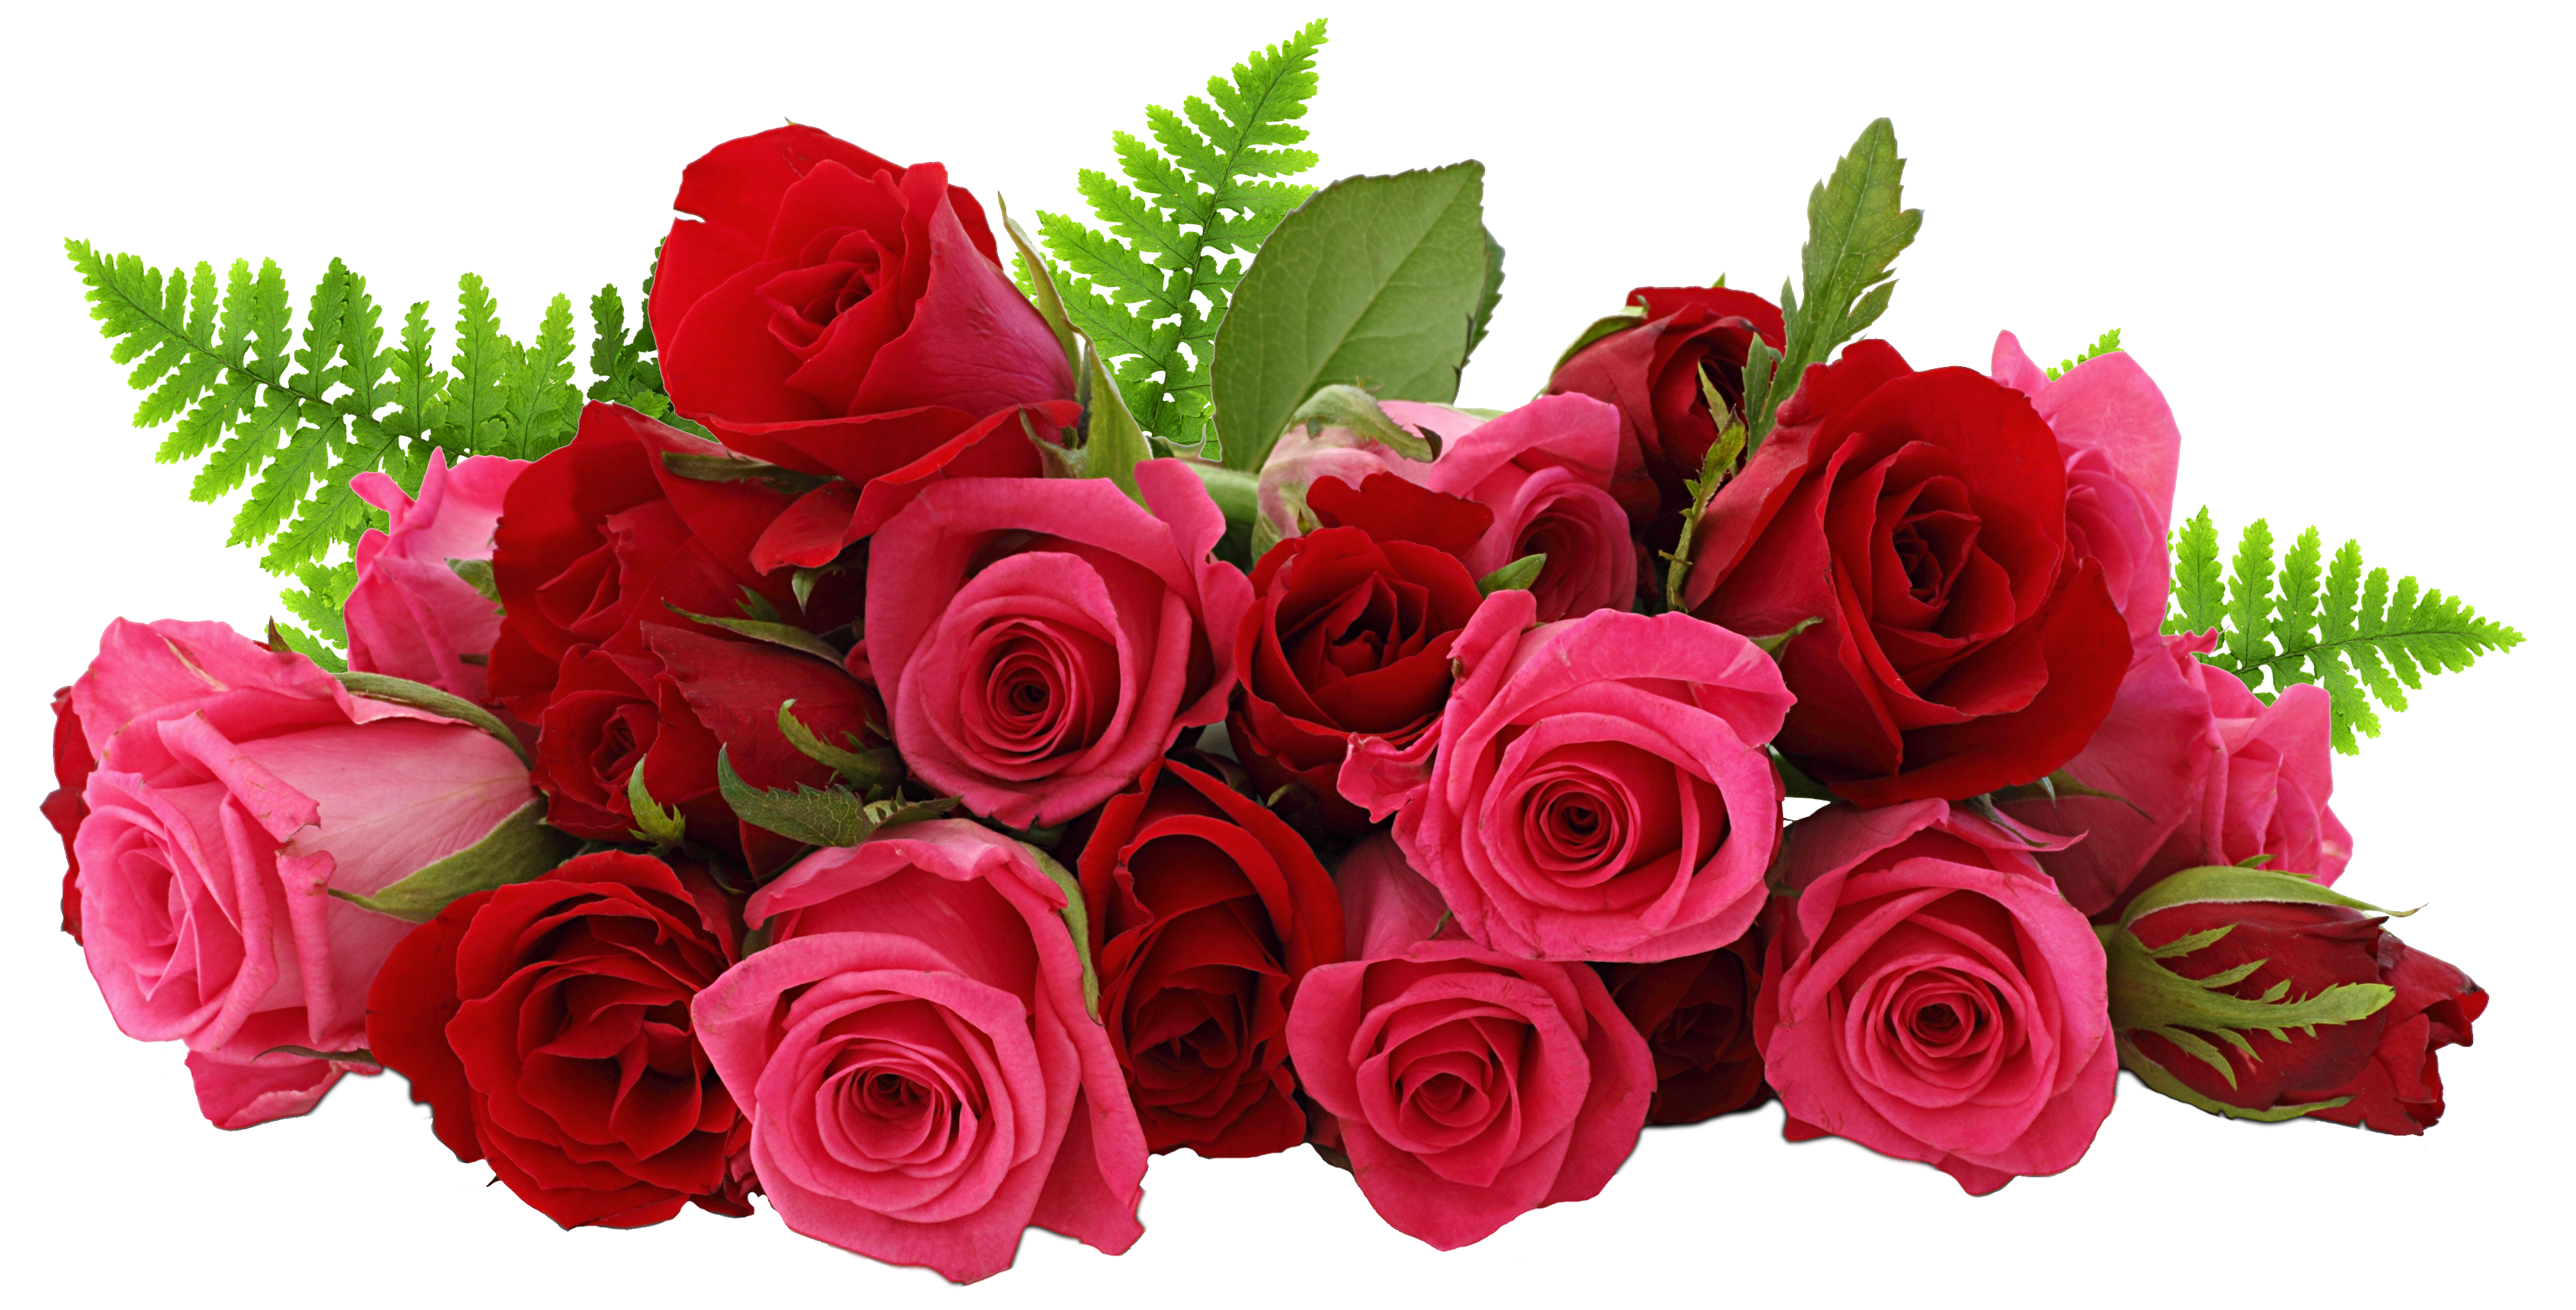 Bouquet Rose Bunch Free Download Image PNG Image